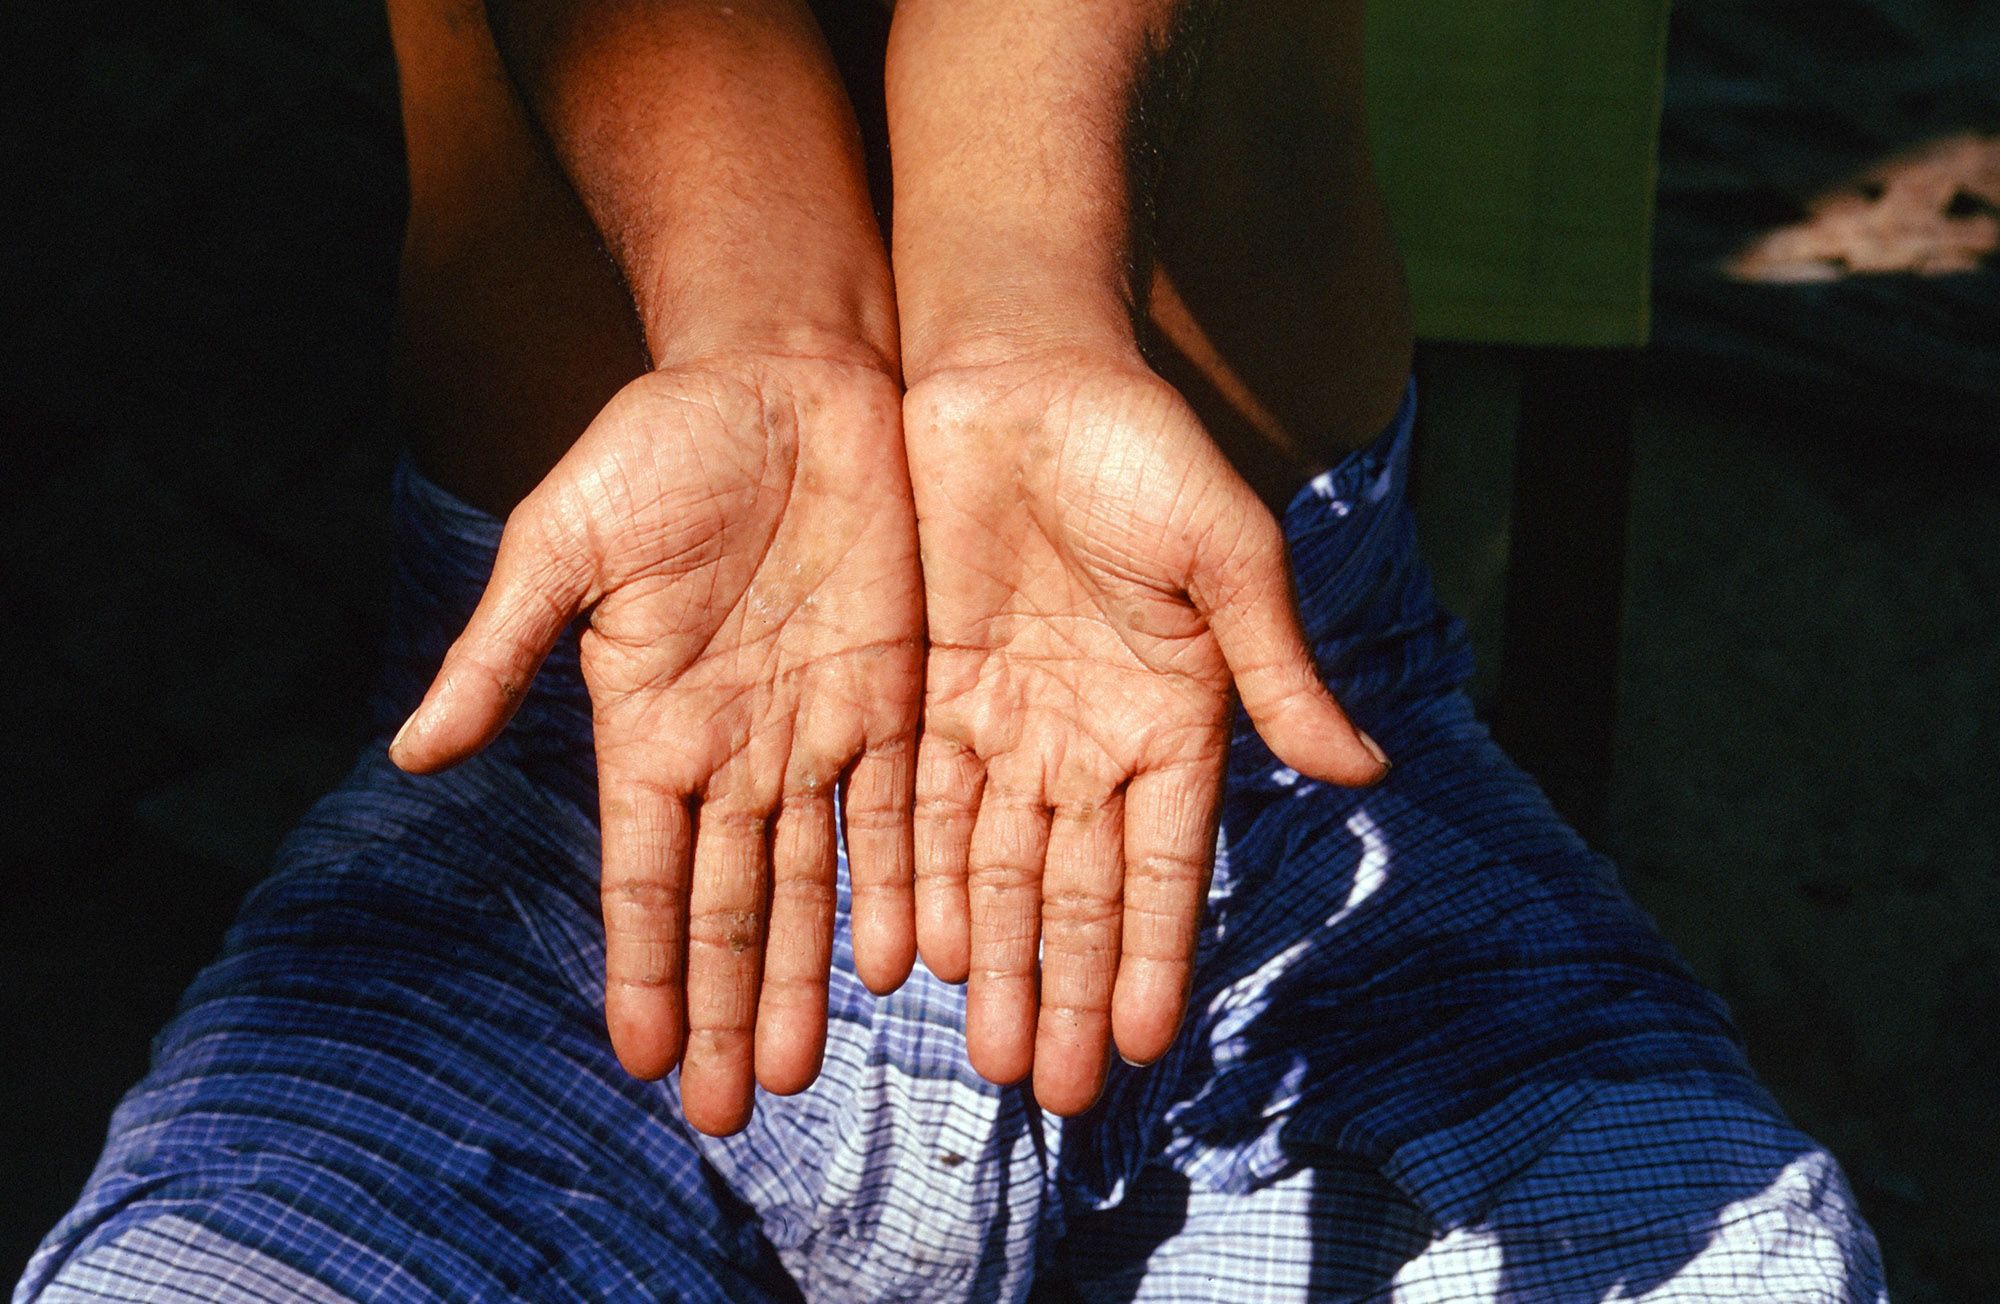 A Bangladeshi man with keratosis, hard growths on the palms of his hands that are a sign of arsenic poisoning. The photo was taken as part of a large-scale research project between 1998 and 1999.